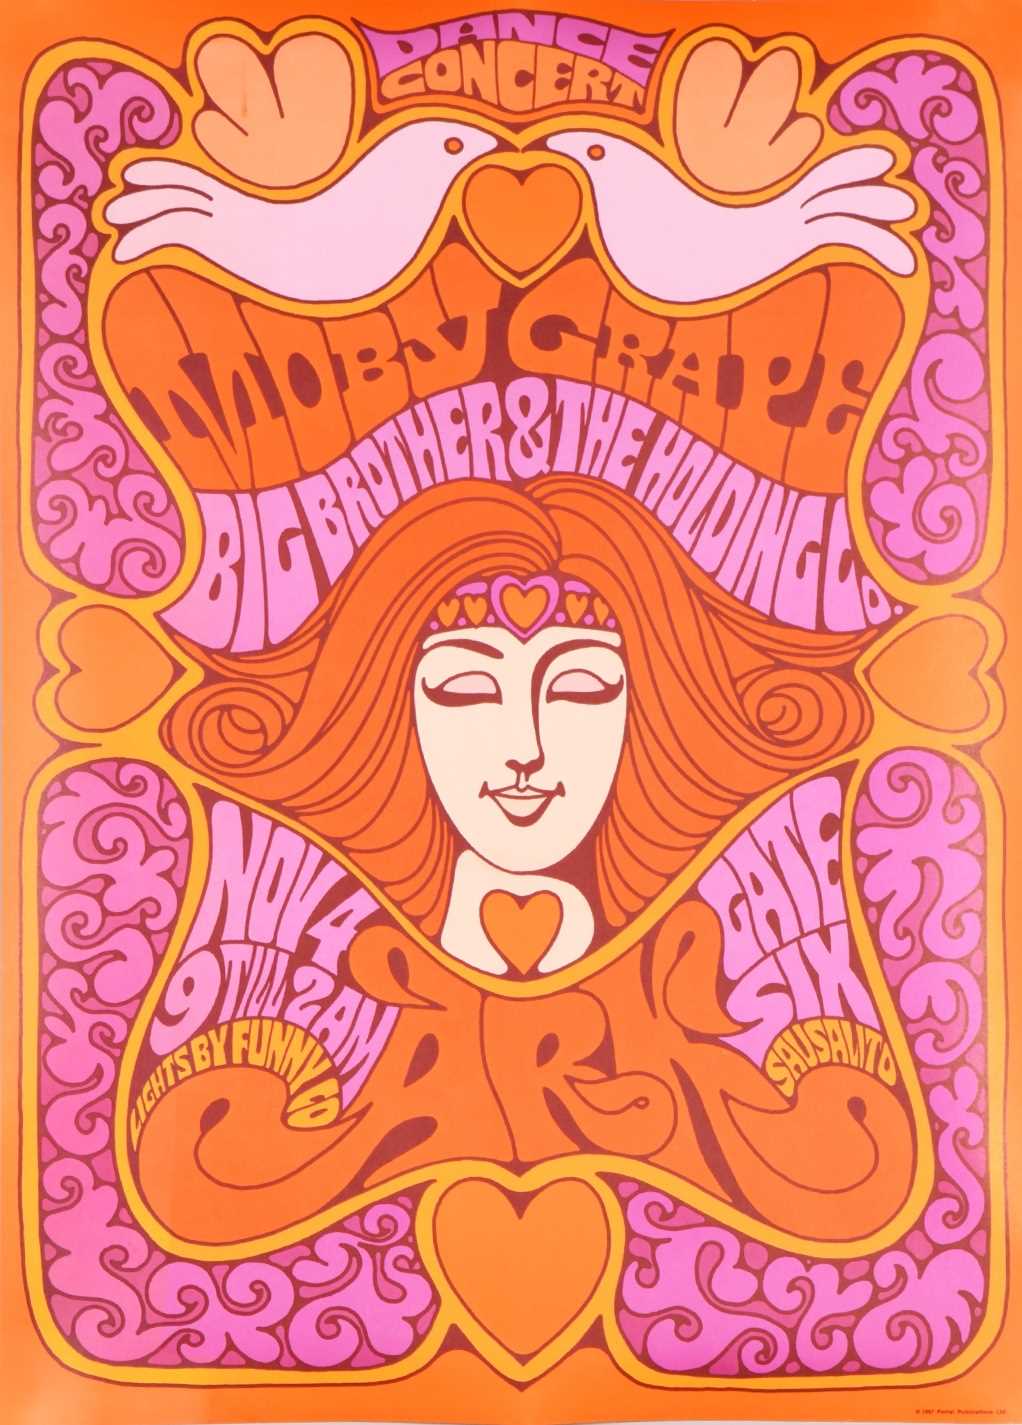 An original 1967 San Francisco Psychadelic concert poster, for Moby Grape and Big Brother and the